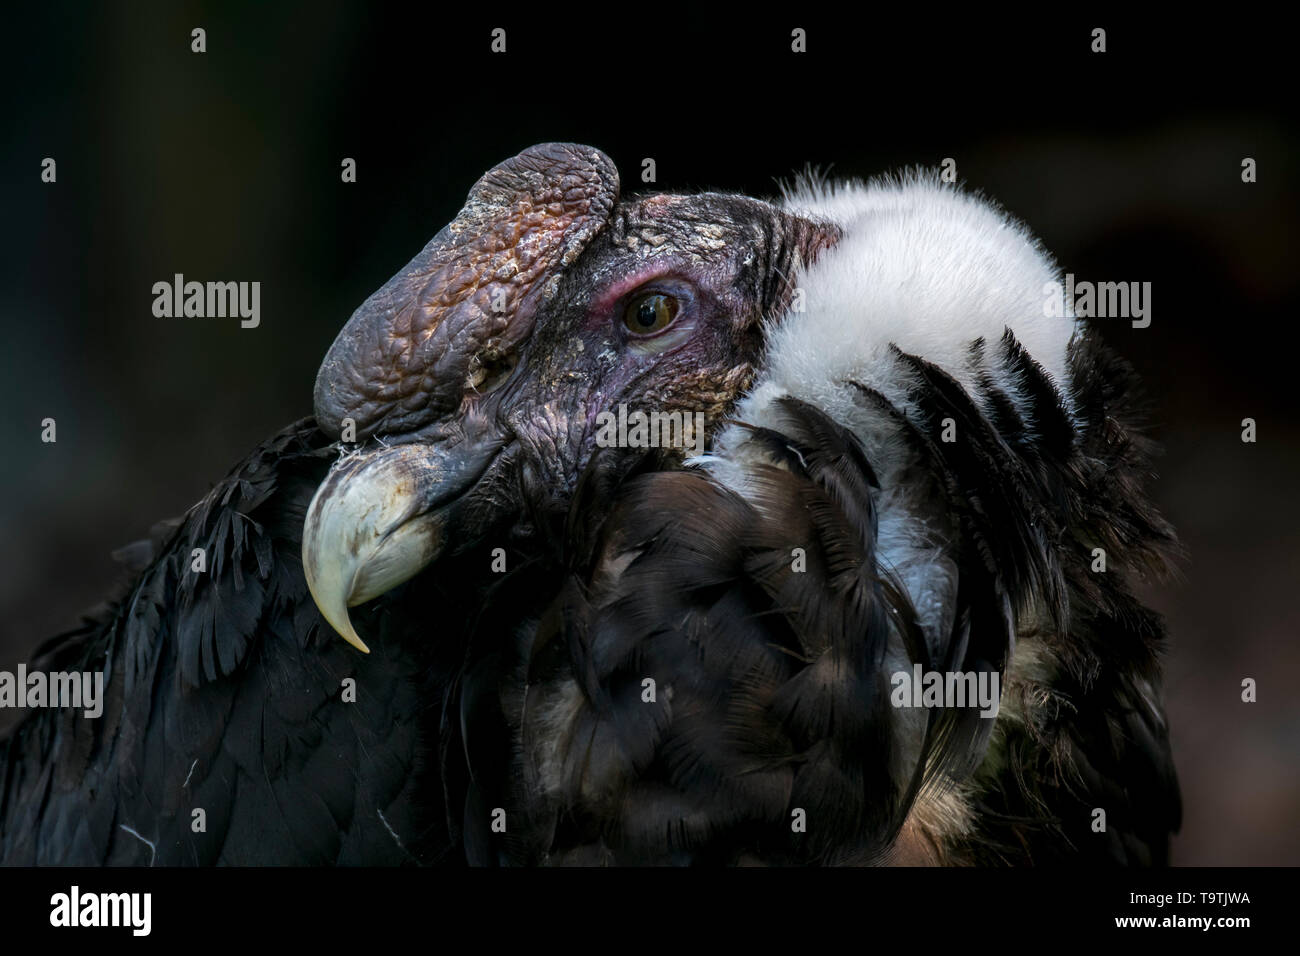 Andean condor / Chilean condor (Vultur gryphus),  New World vulture native to the Andes, South America Stock Photo